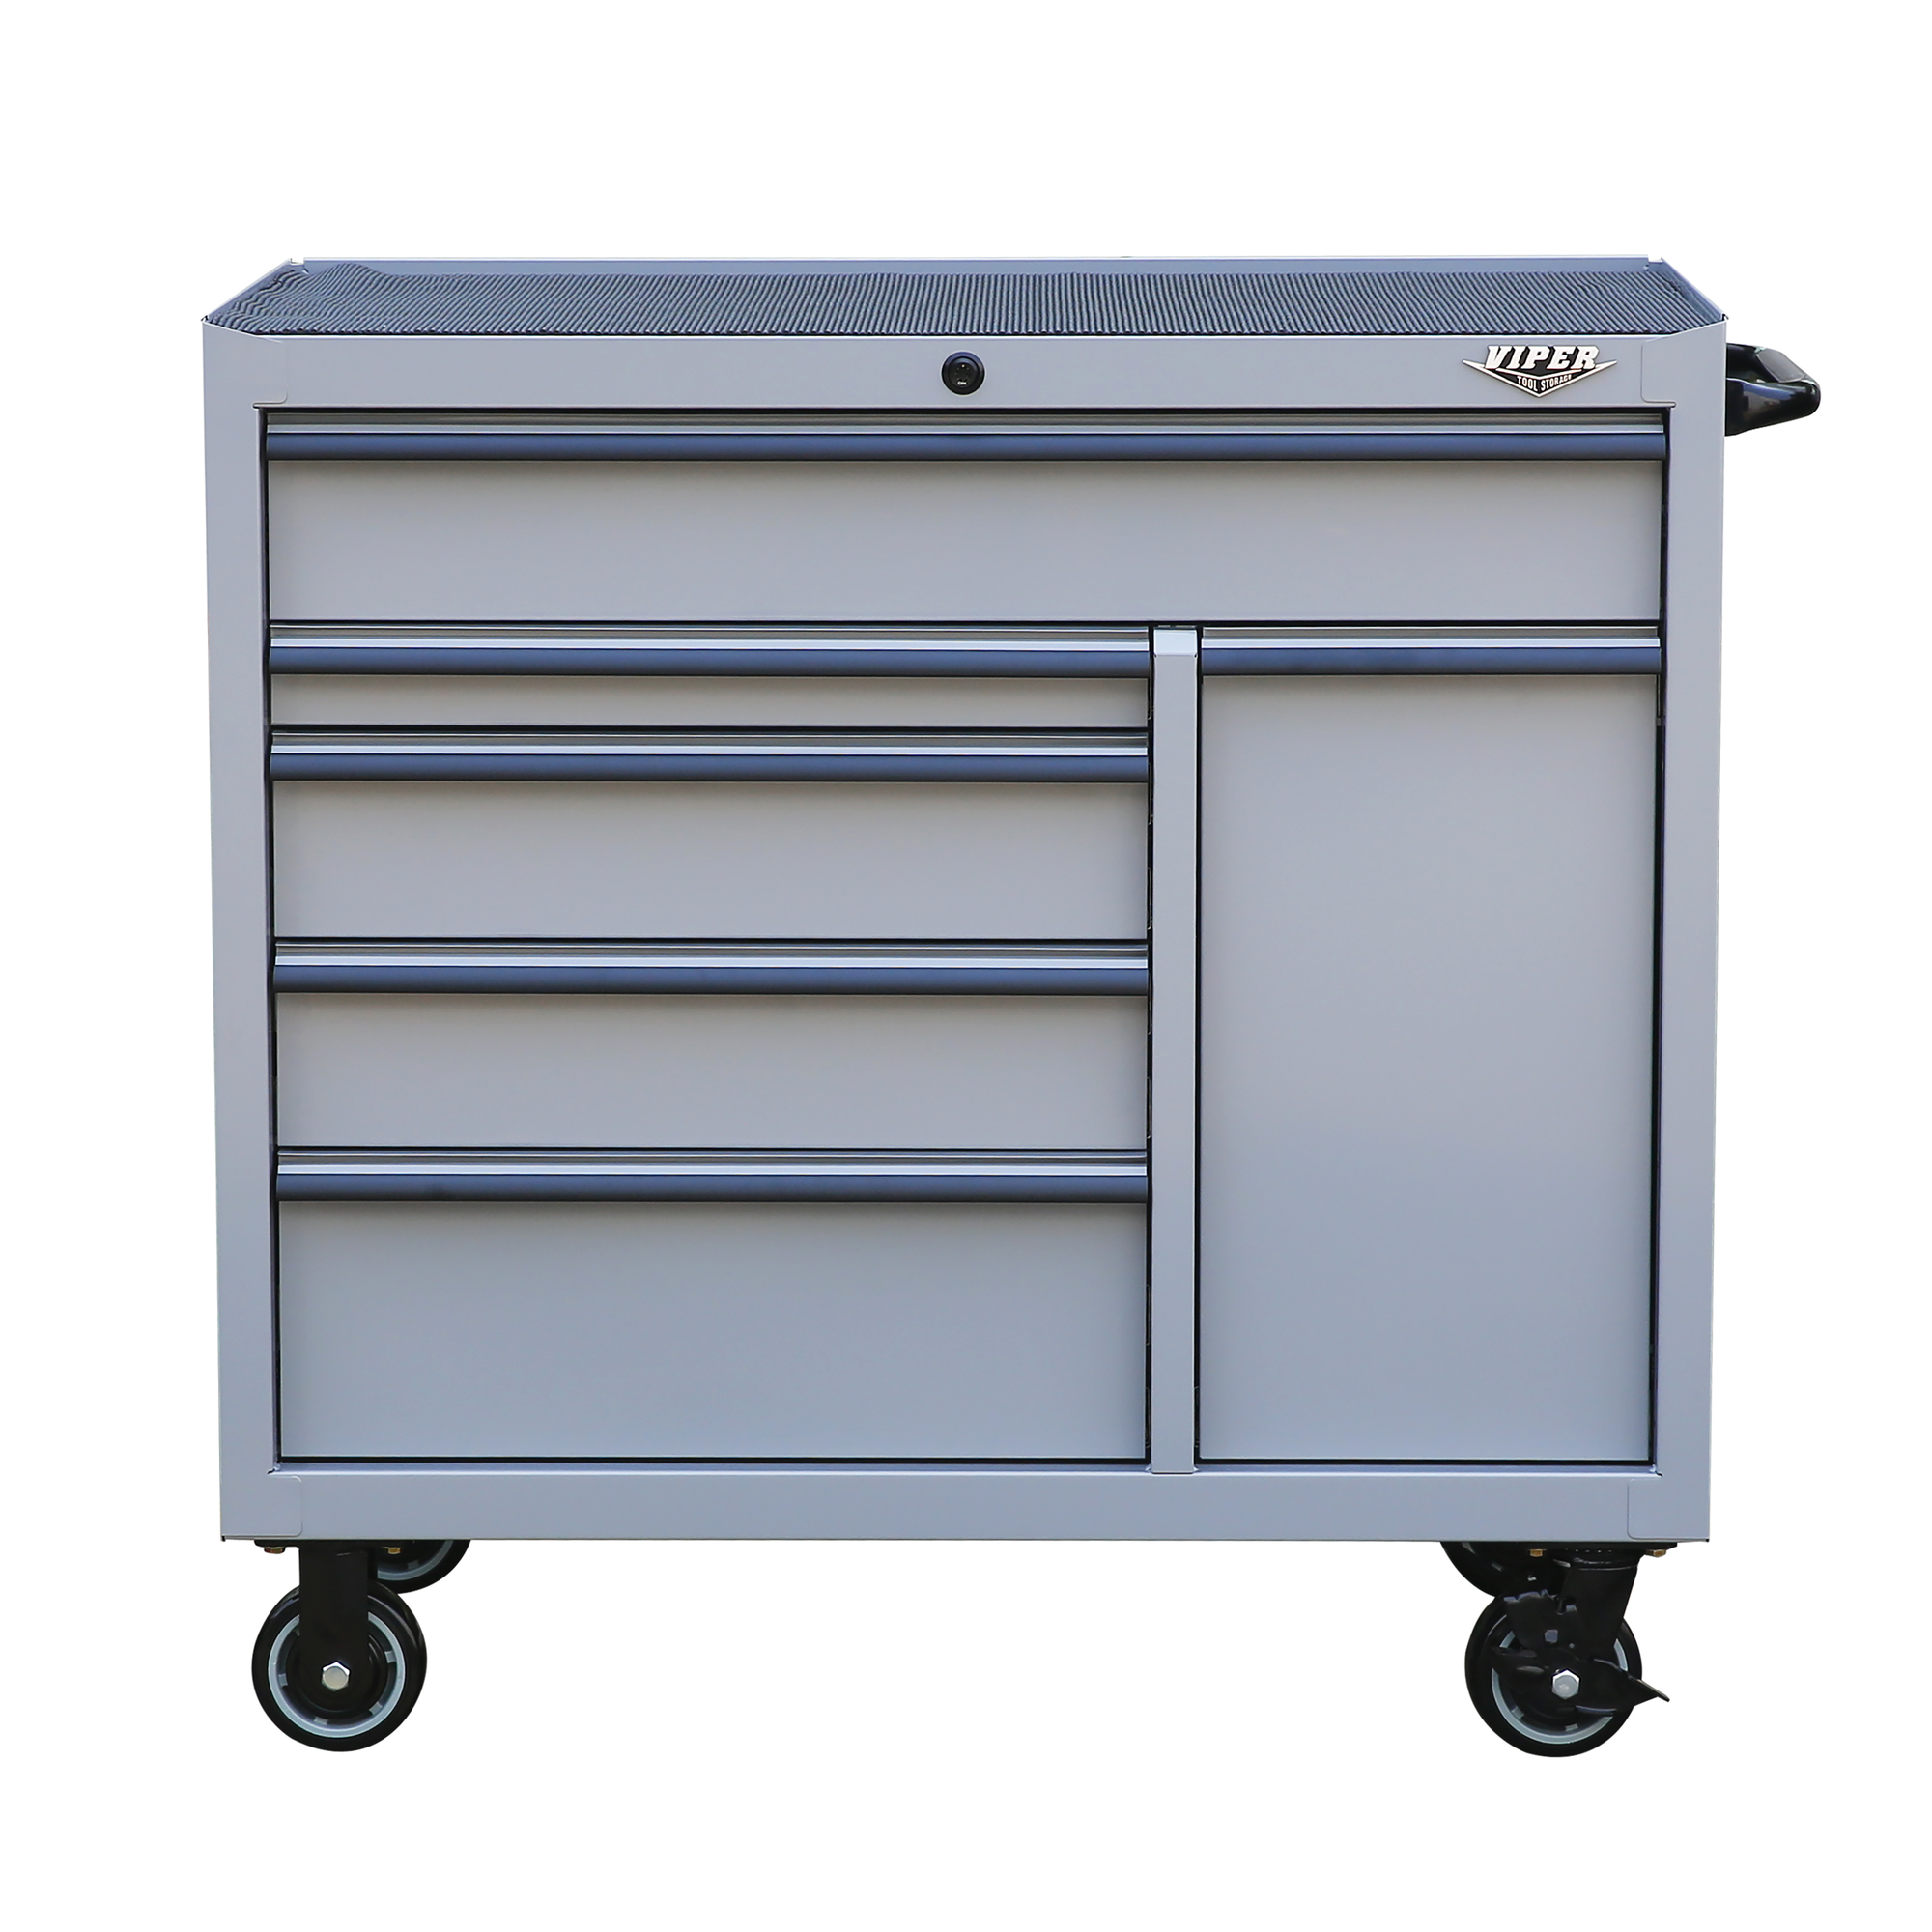 Viper Tool Storage, 6-Drawer Rolling Cabinet, Gray, Width 41.5 in, Height 40.75 in, Color Gray, Model V4106GRAYR